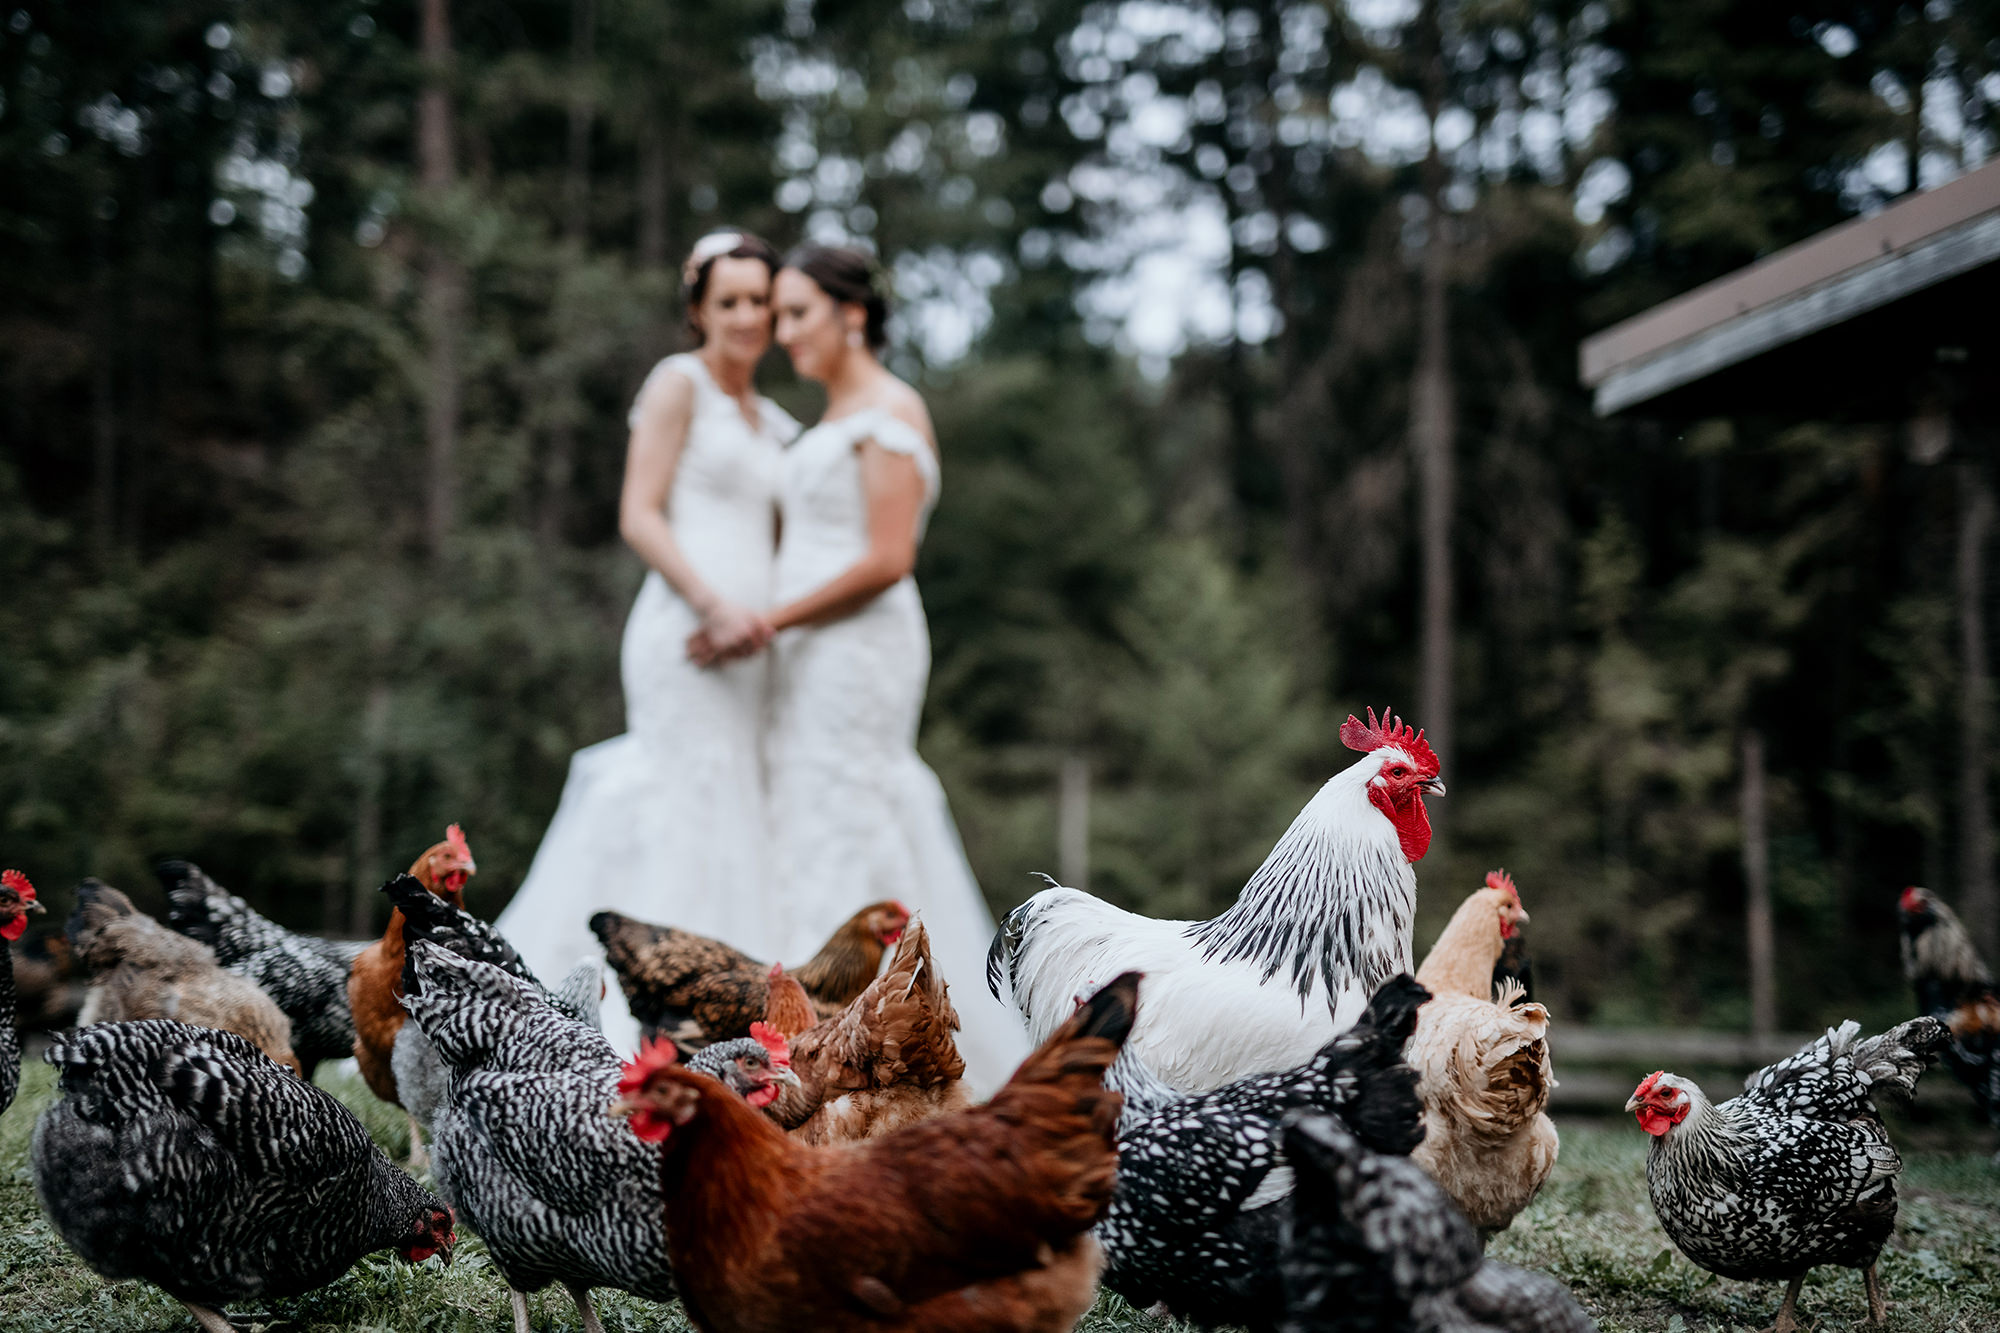 A rooster struts in front of two brides in a hen house.